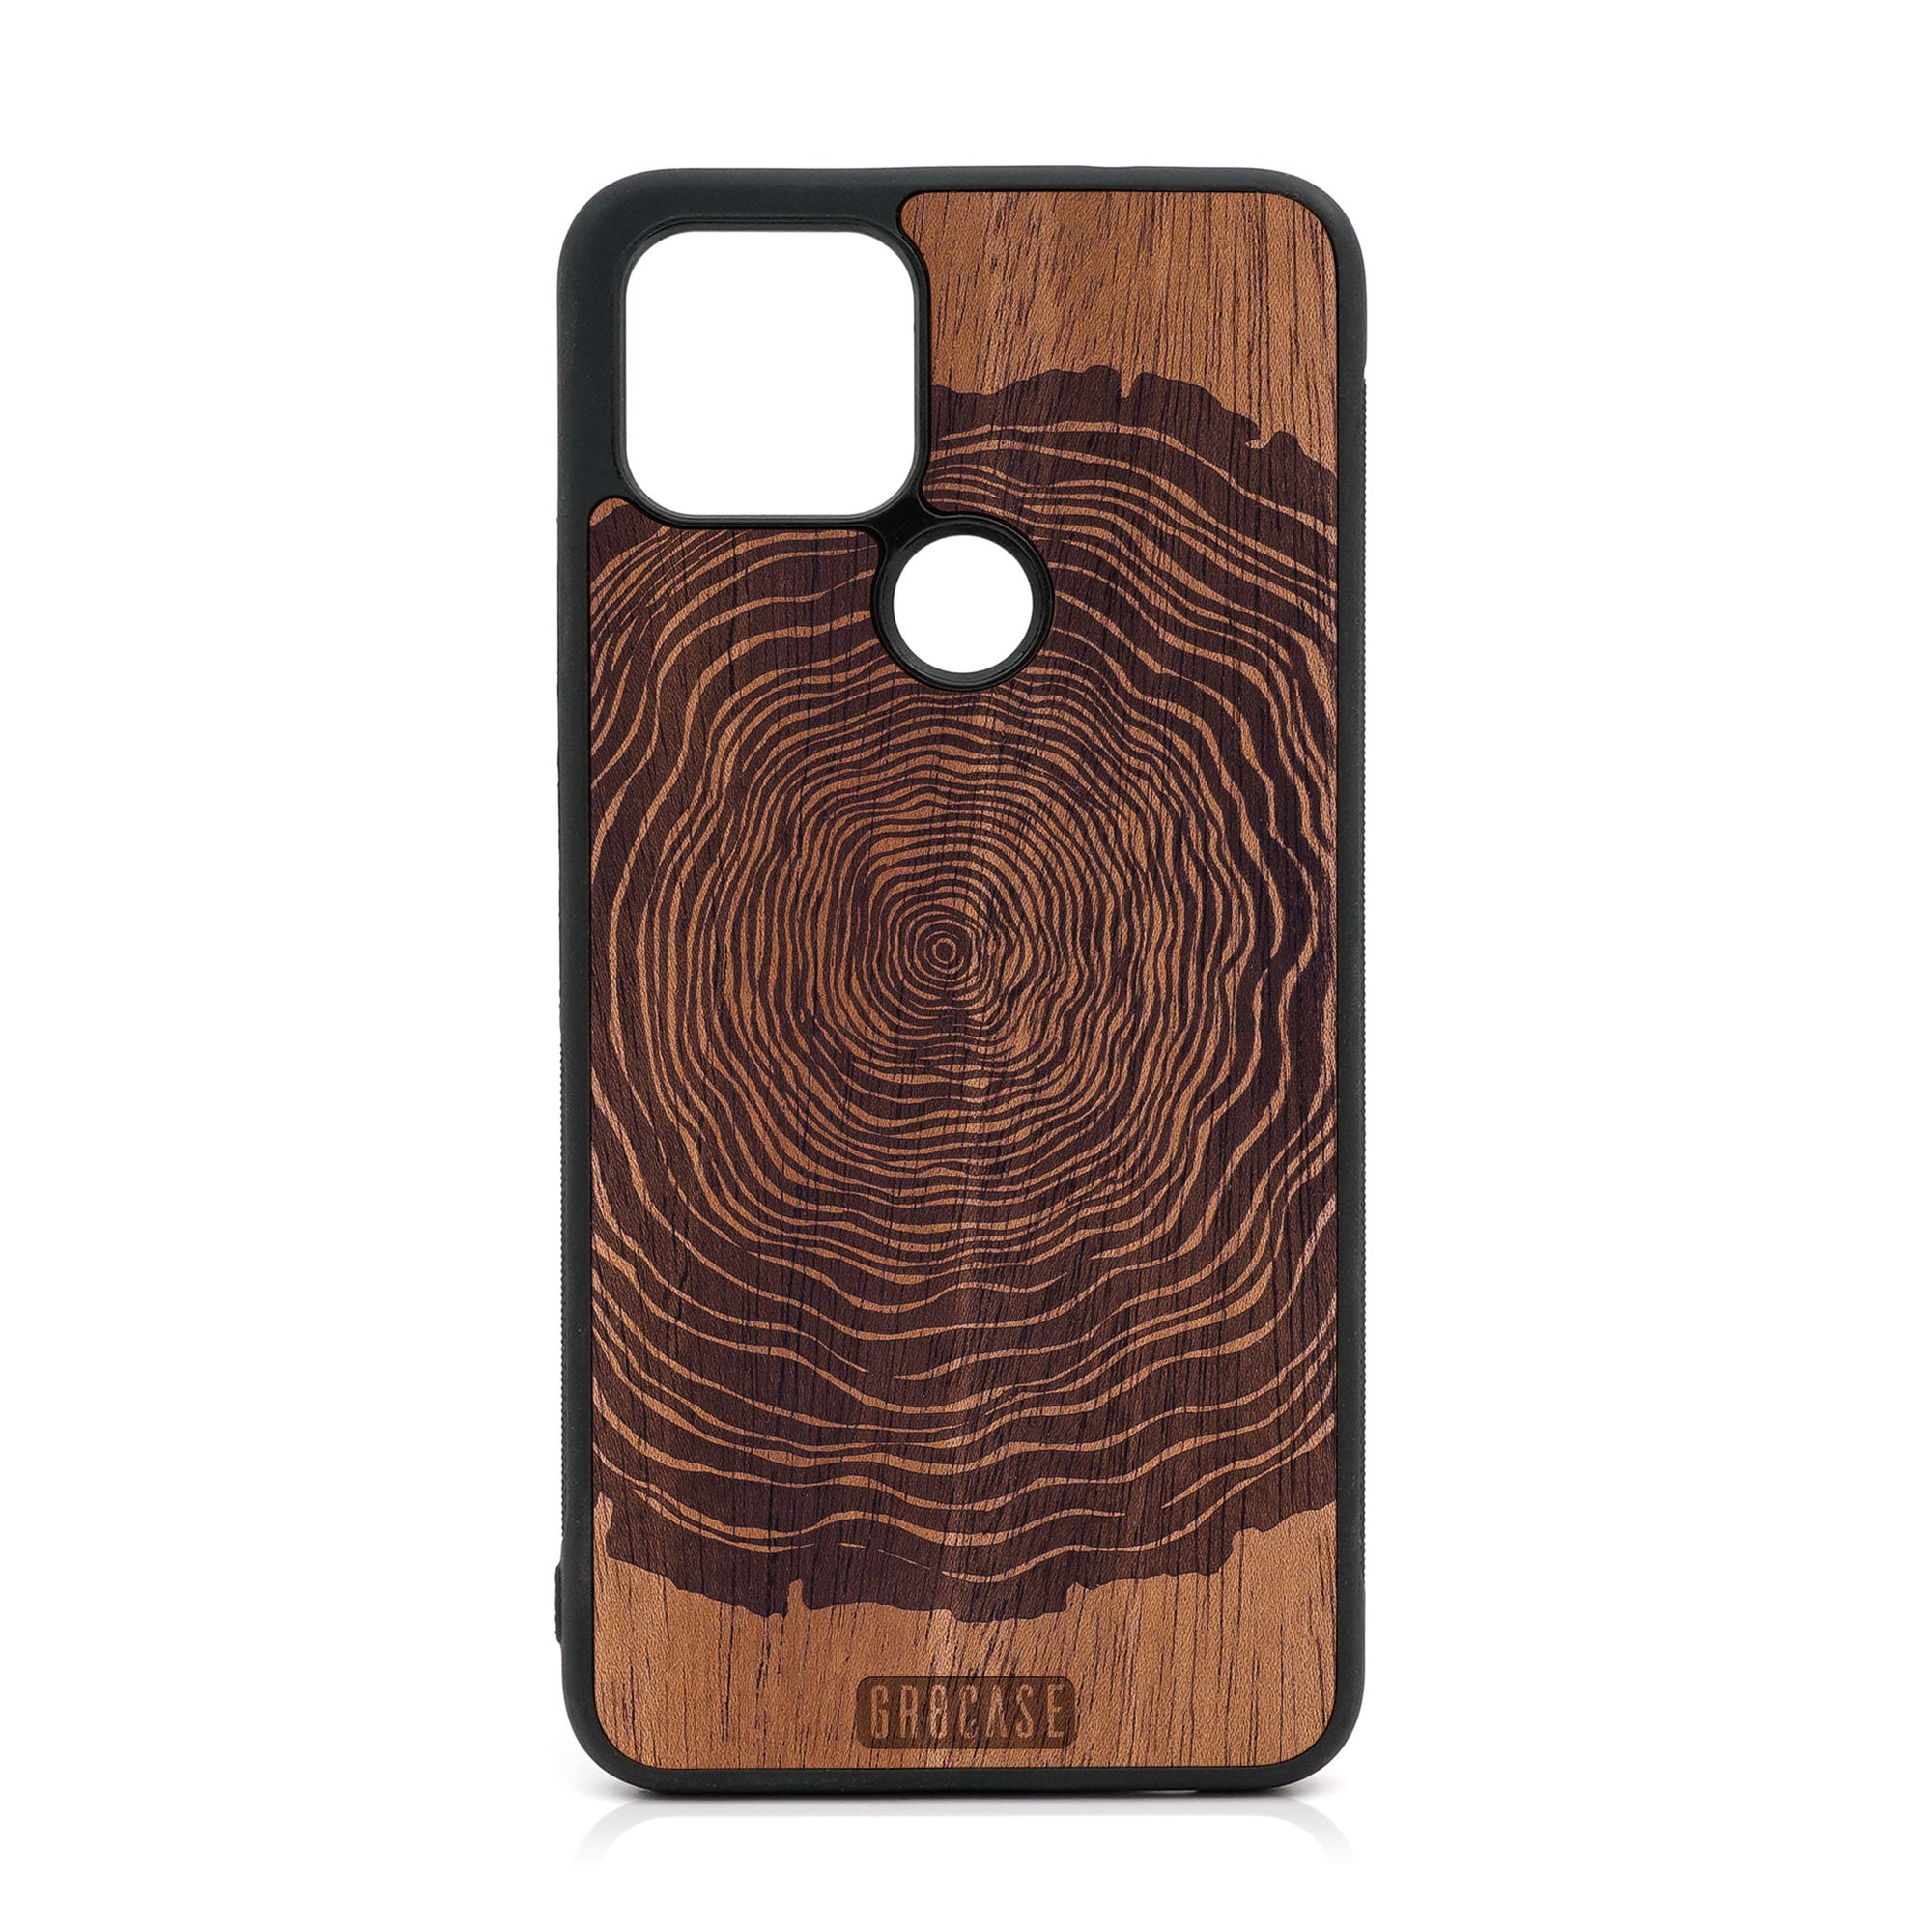 Tree Rings Design Wood Case For Google Pixel 5 XL/4A 5G